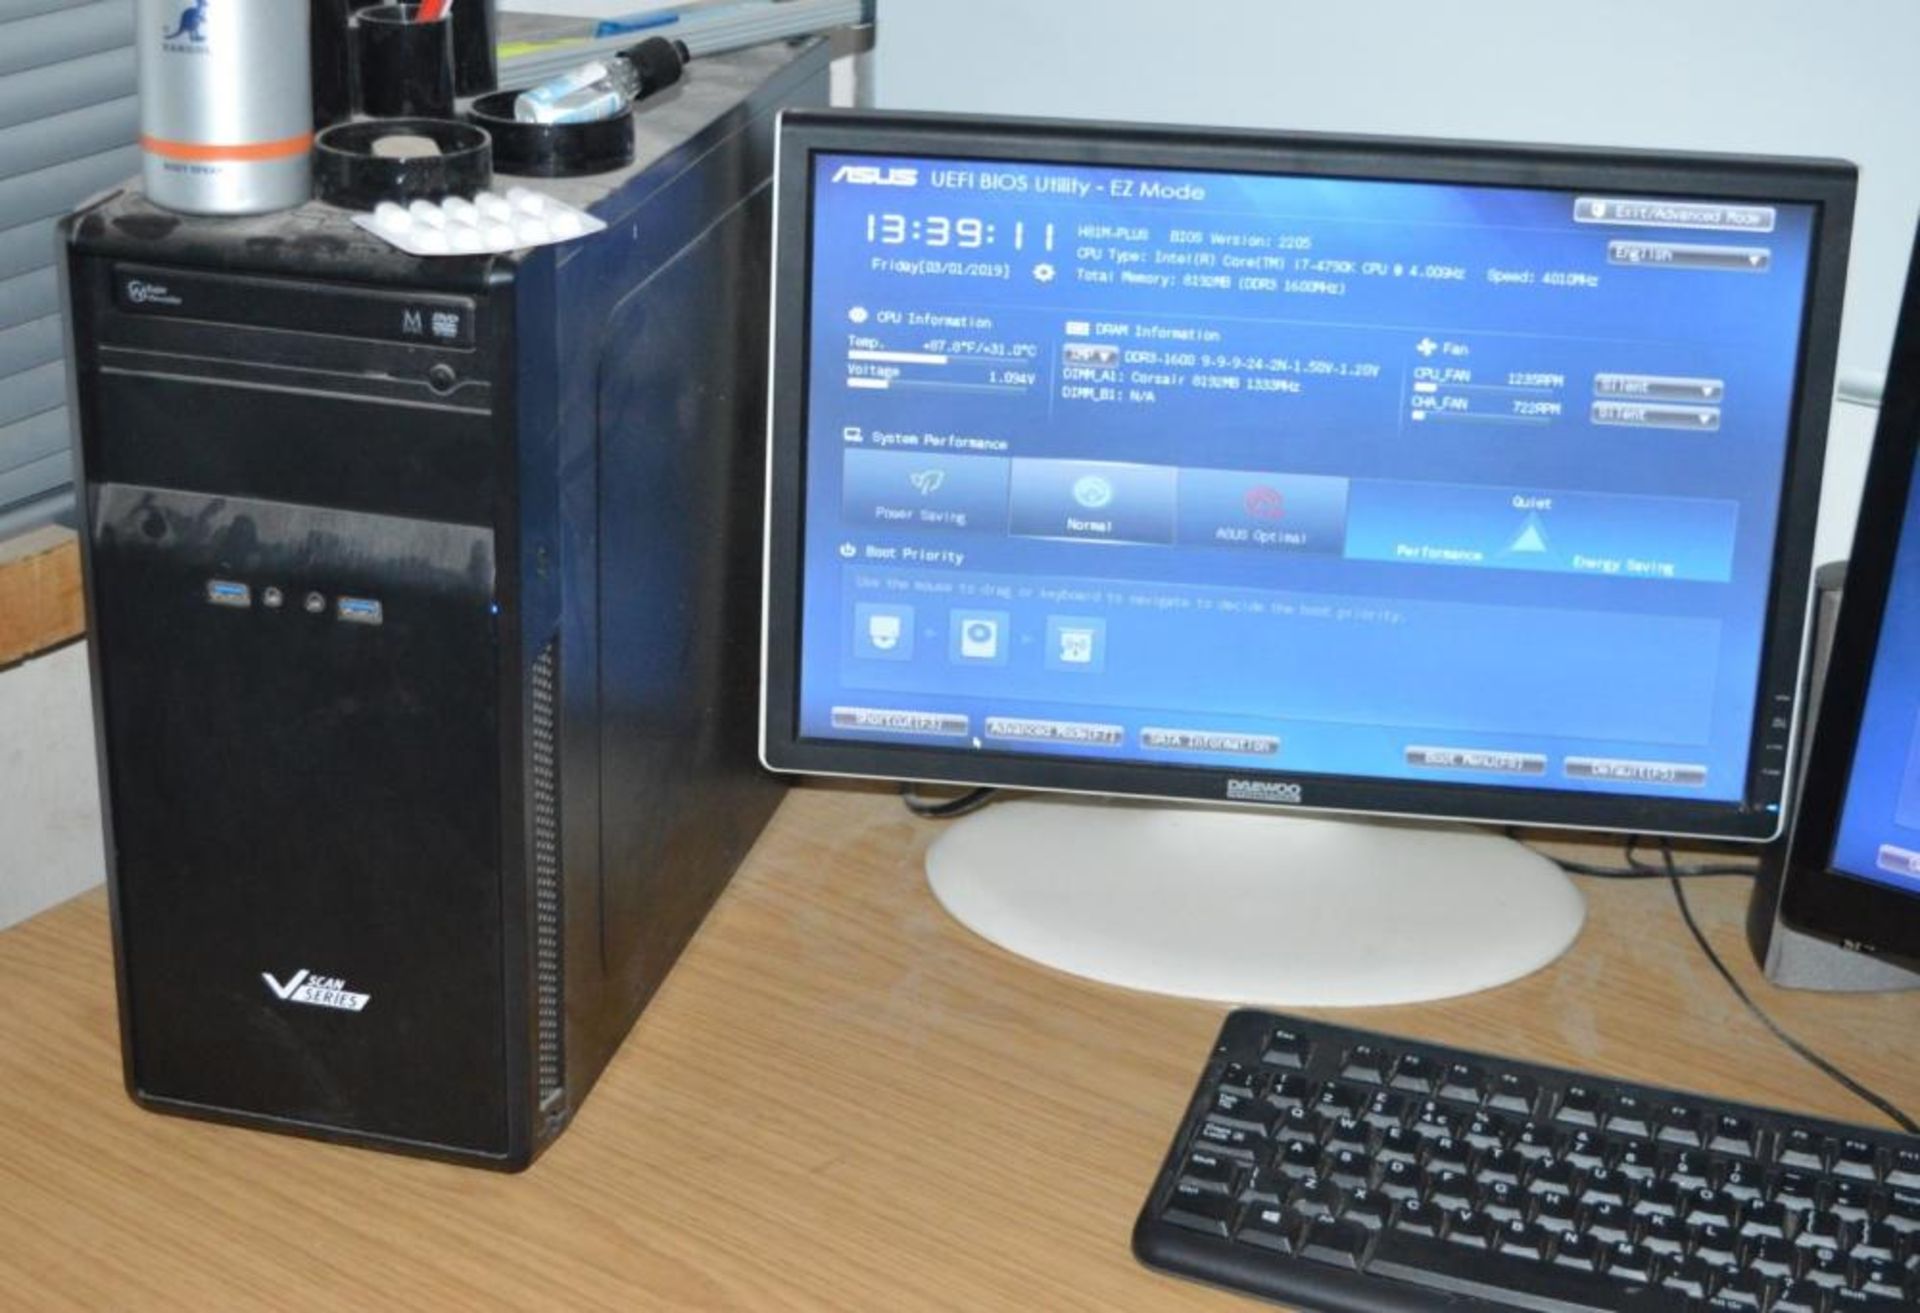 1 x Desktop Computer With Two Flat Screen Monitors, Keyboard and Mouse - Featuring Intel Core i7-479 - Image 3 of 5